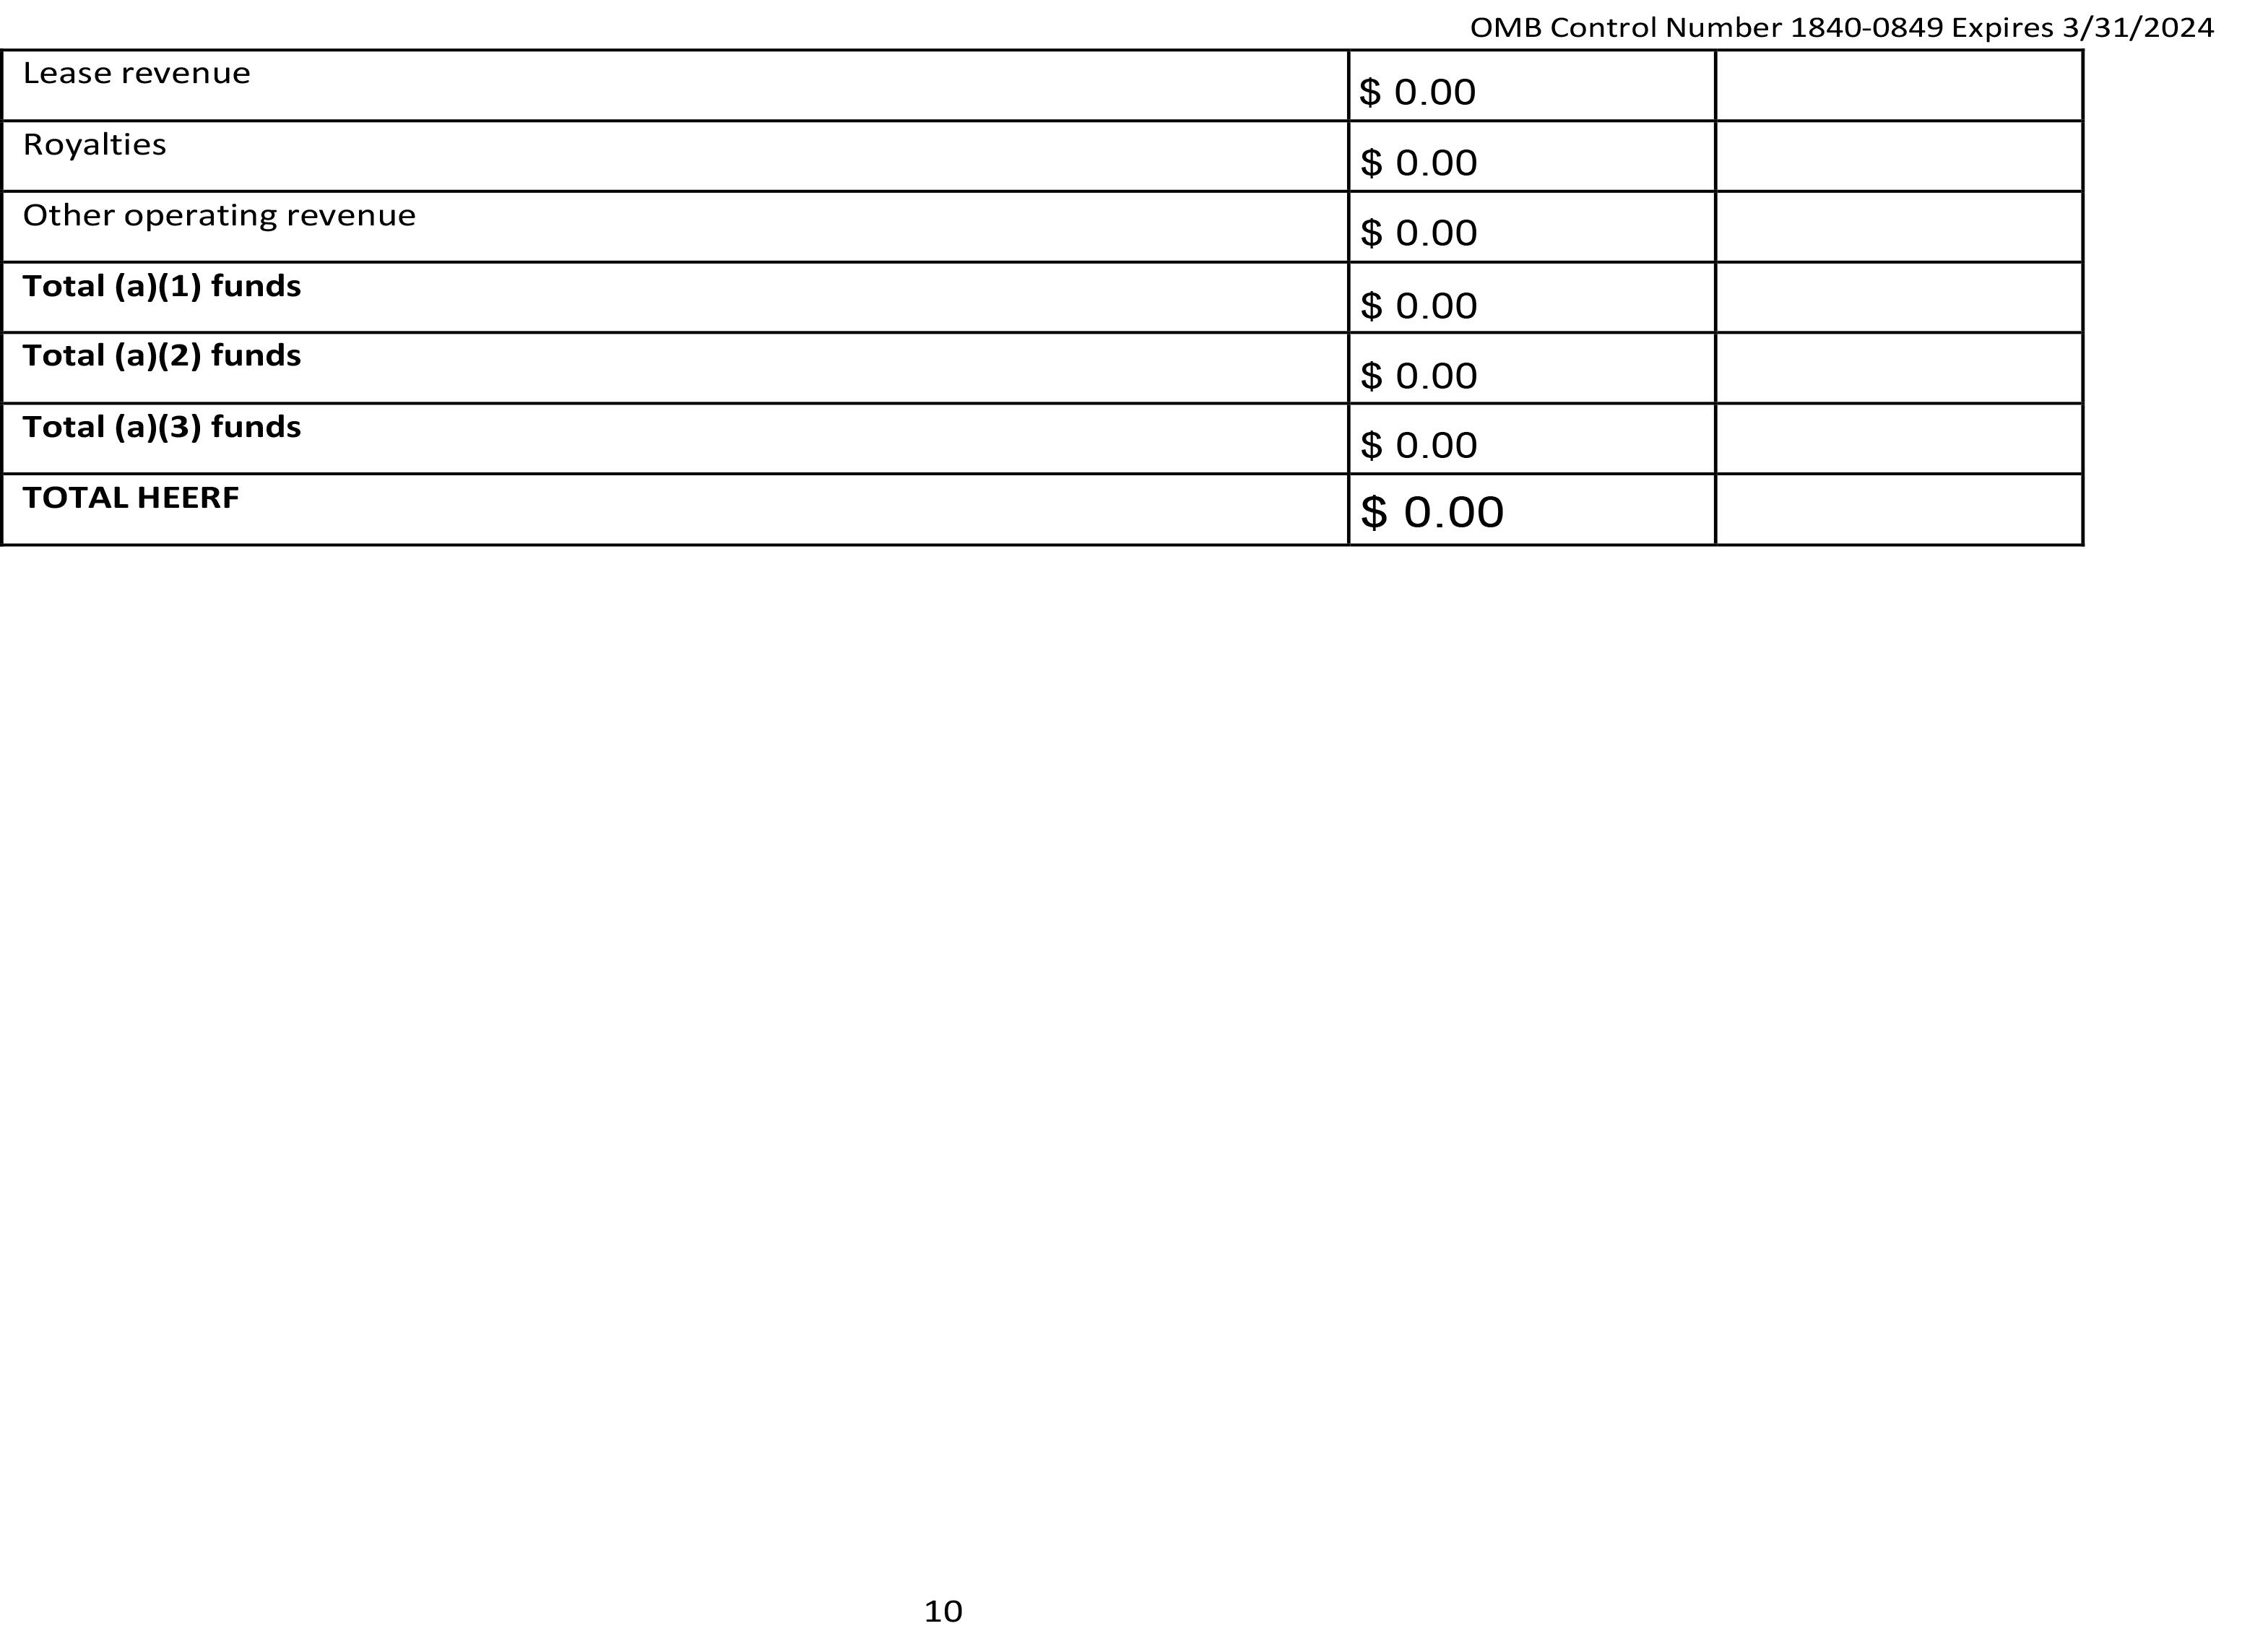 Second Quarter Expenditure Report - Page 10